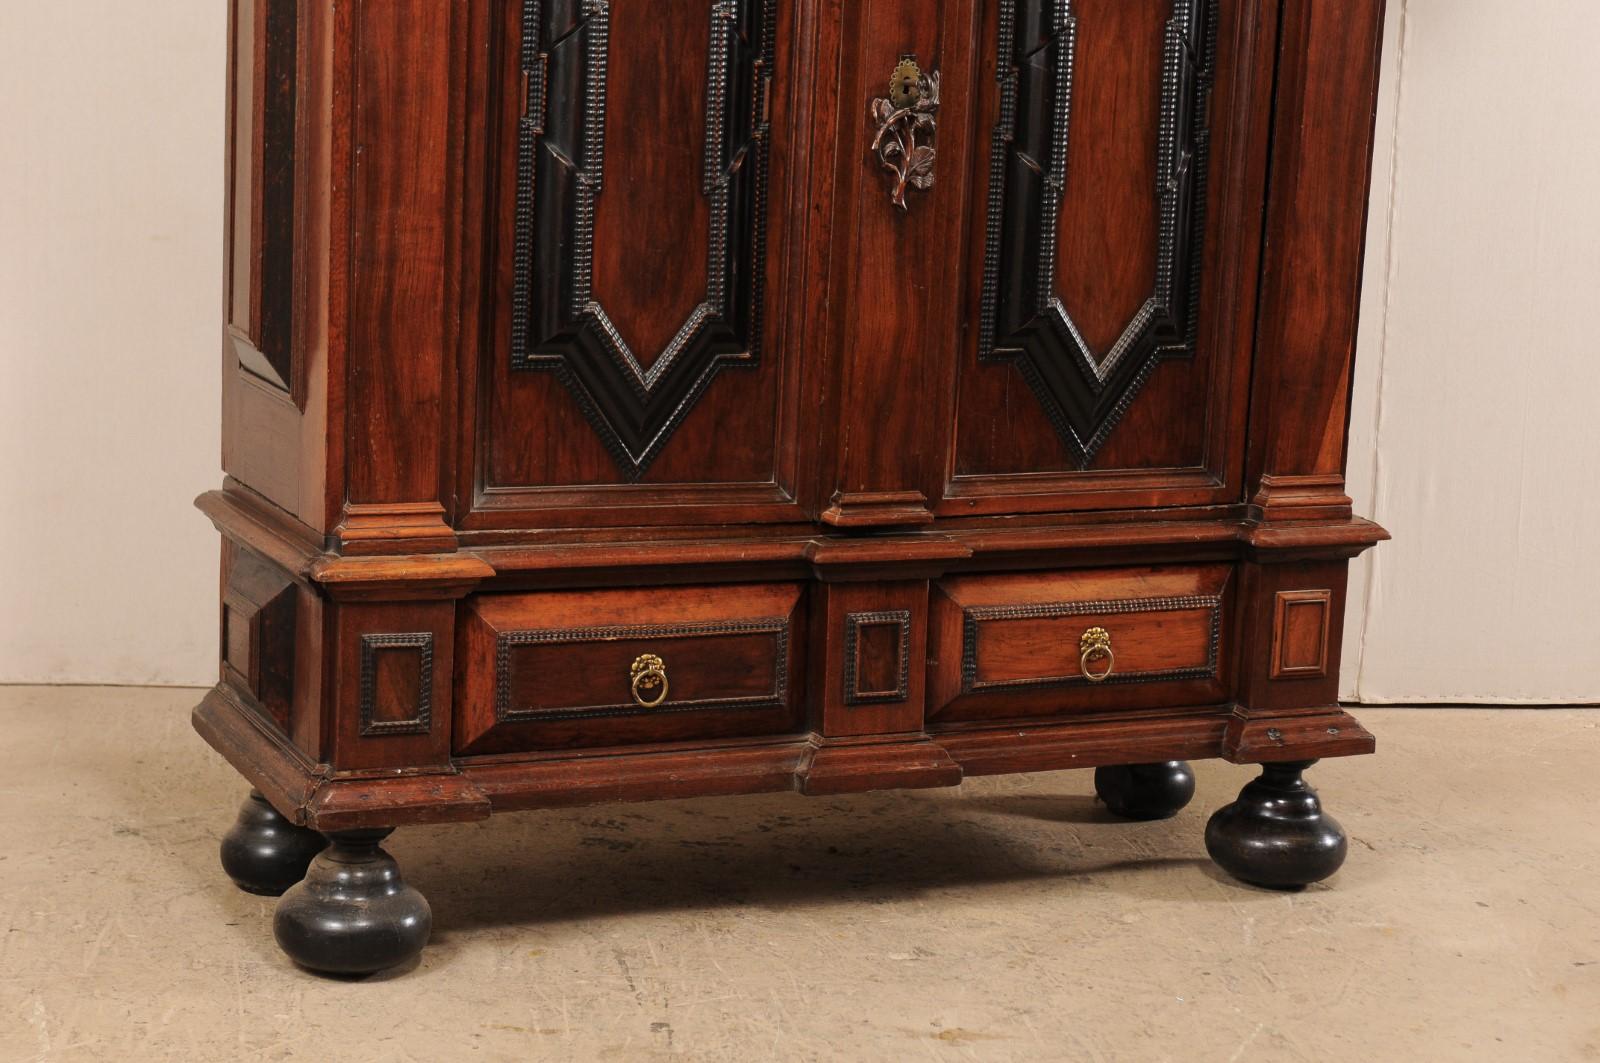 An Early 18th Century Swedish Period Baroque Kas Cabinet with Ebonized Accents In Good Condition For Sale In Atlanta, GA